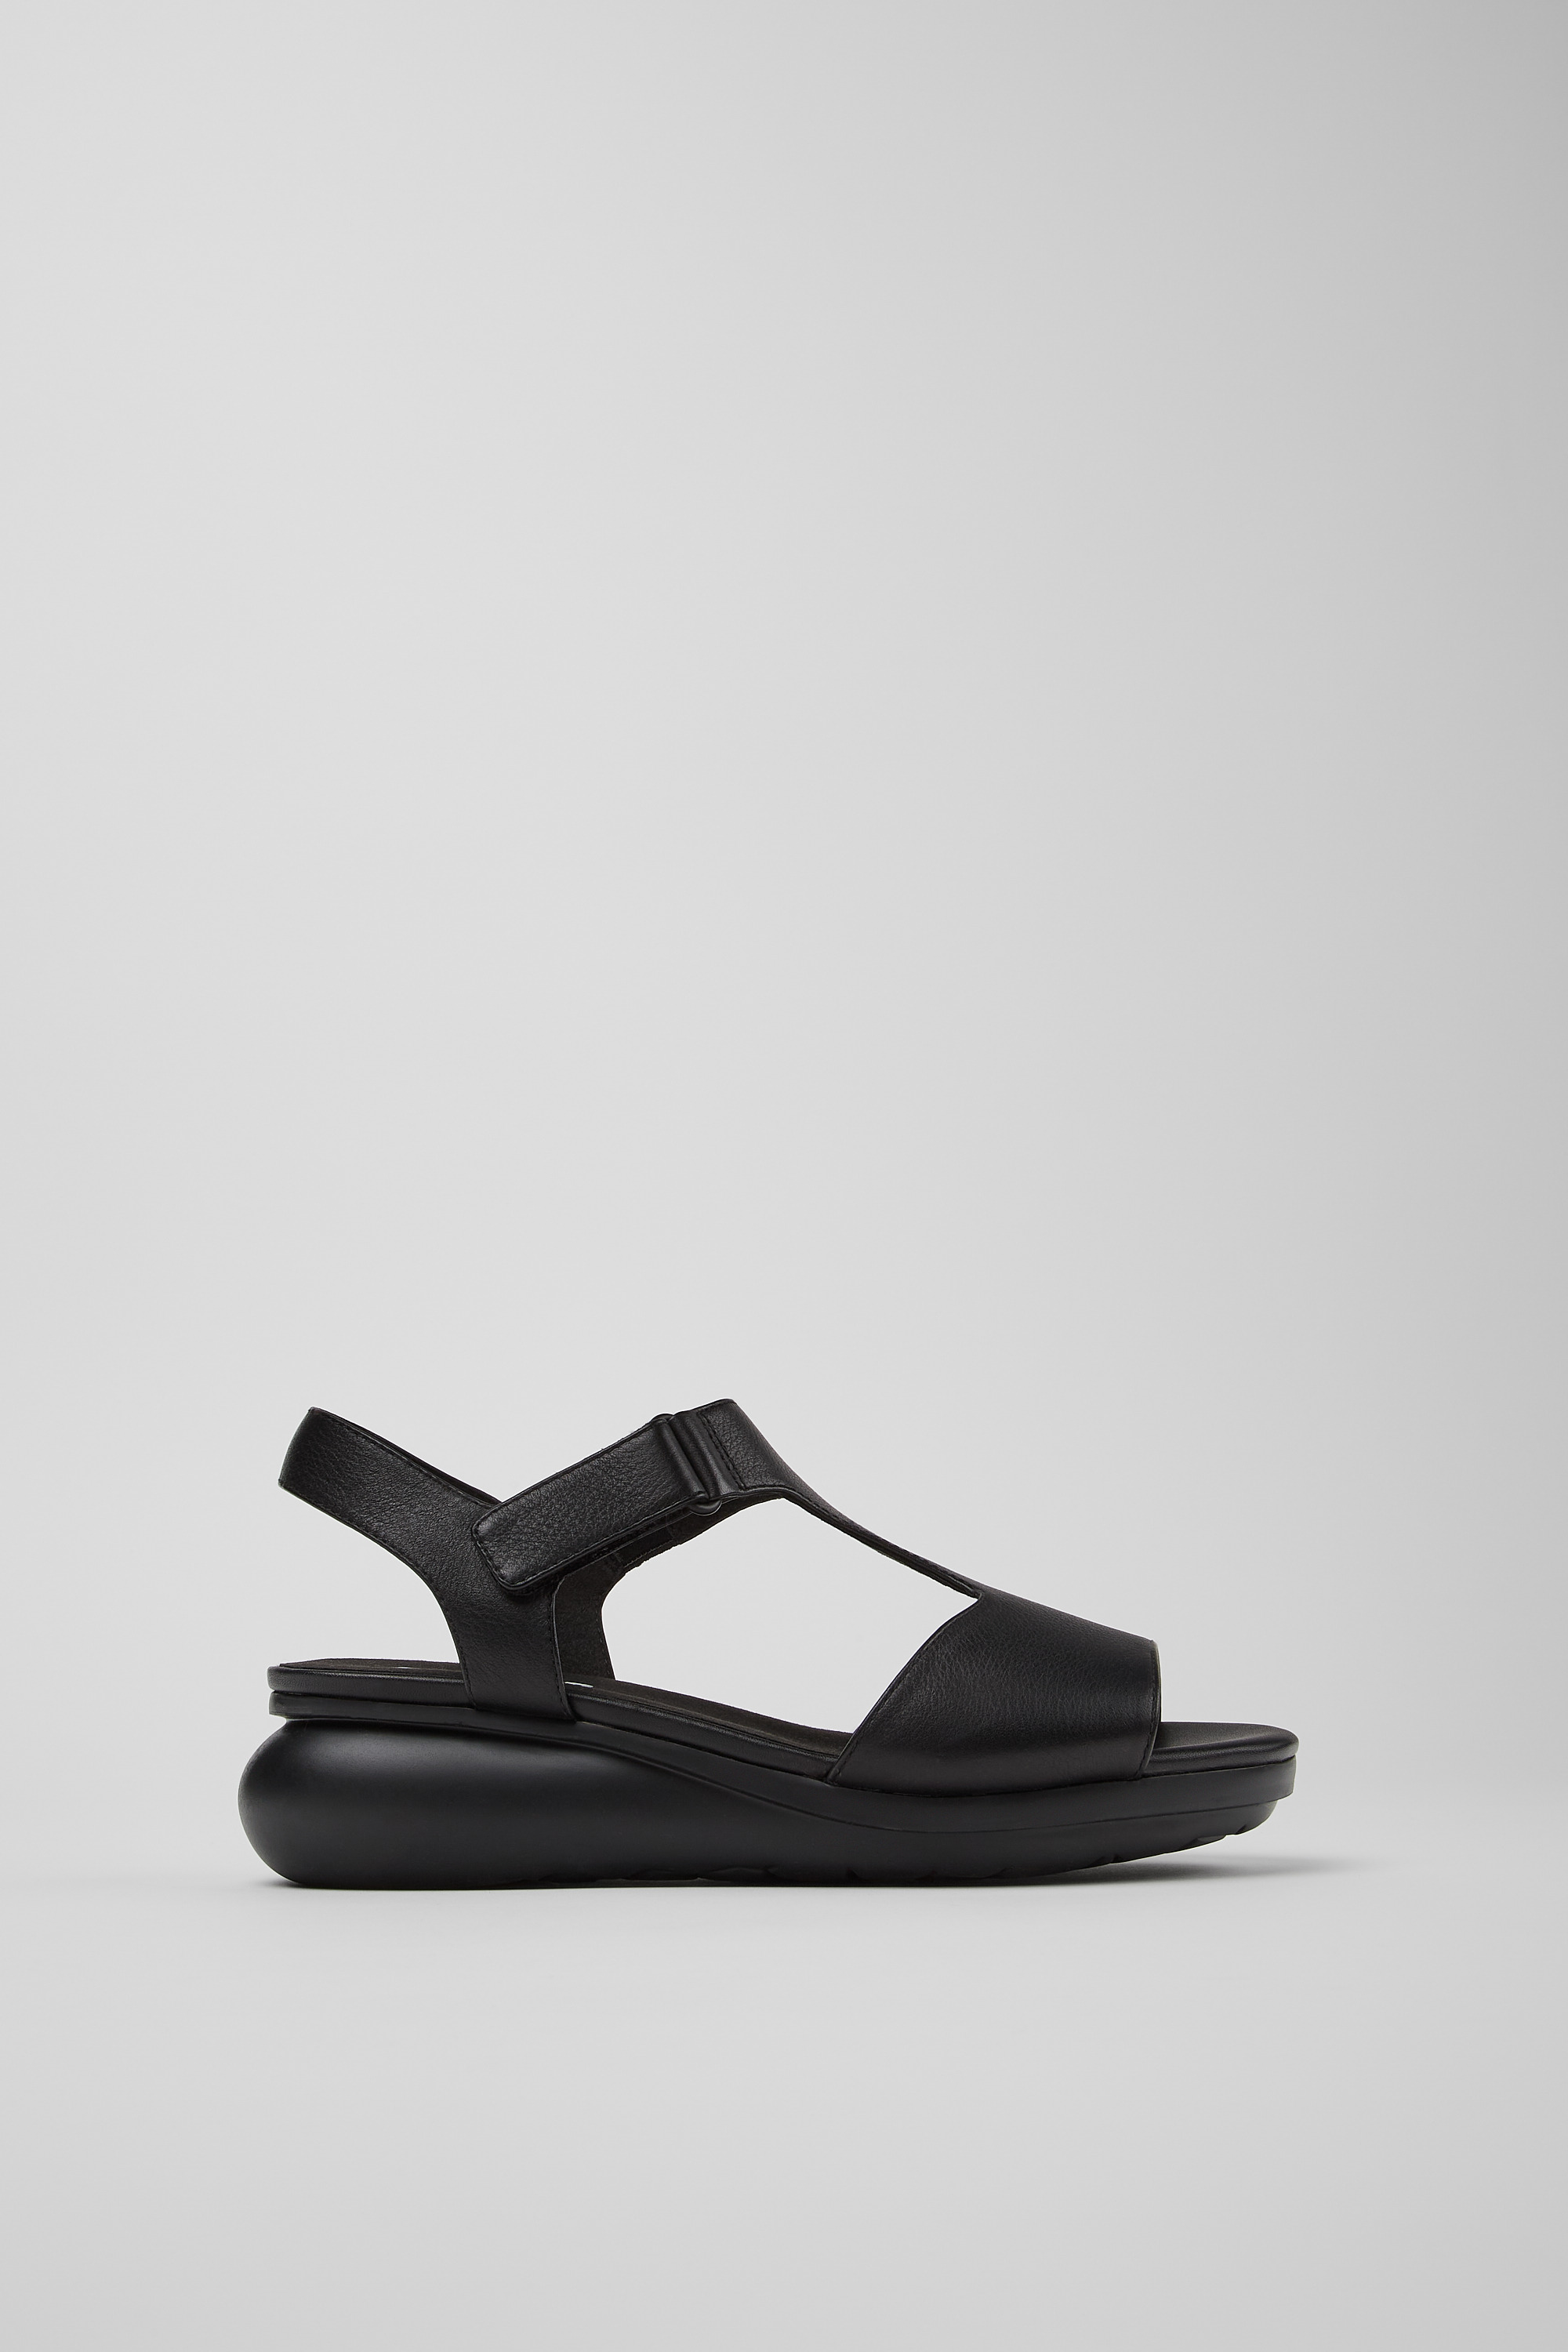 BALLOON Black Sandals for Women - Spring/Summer collection